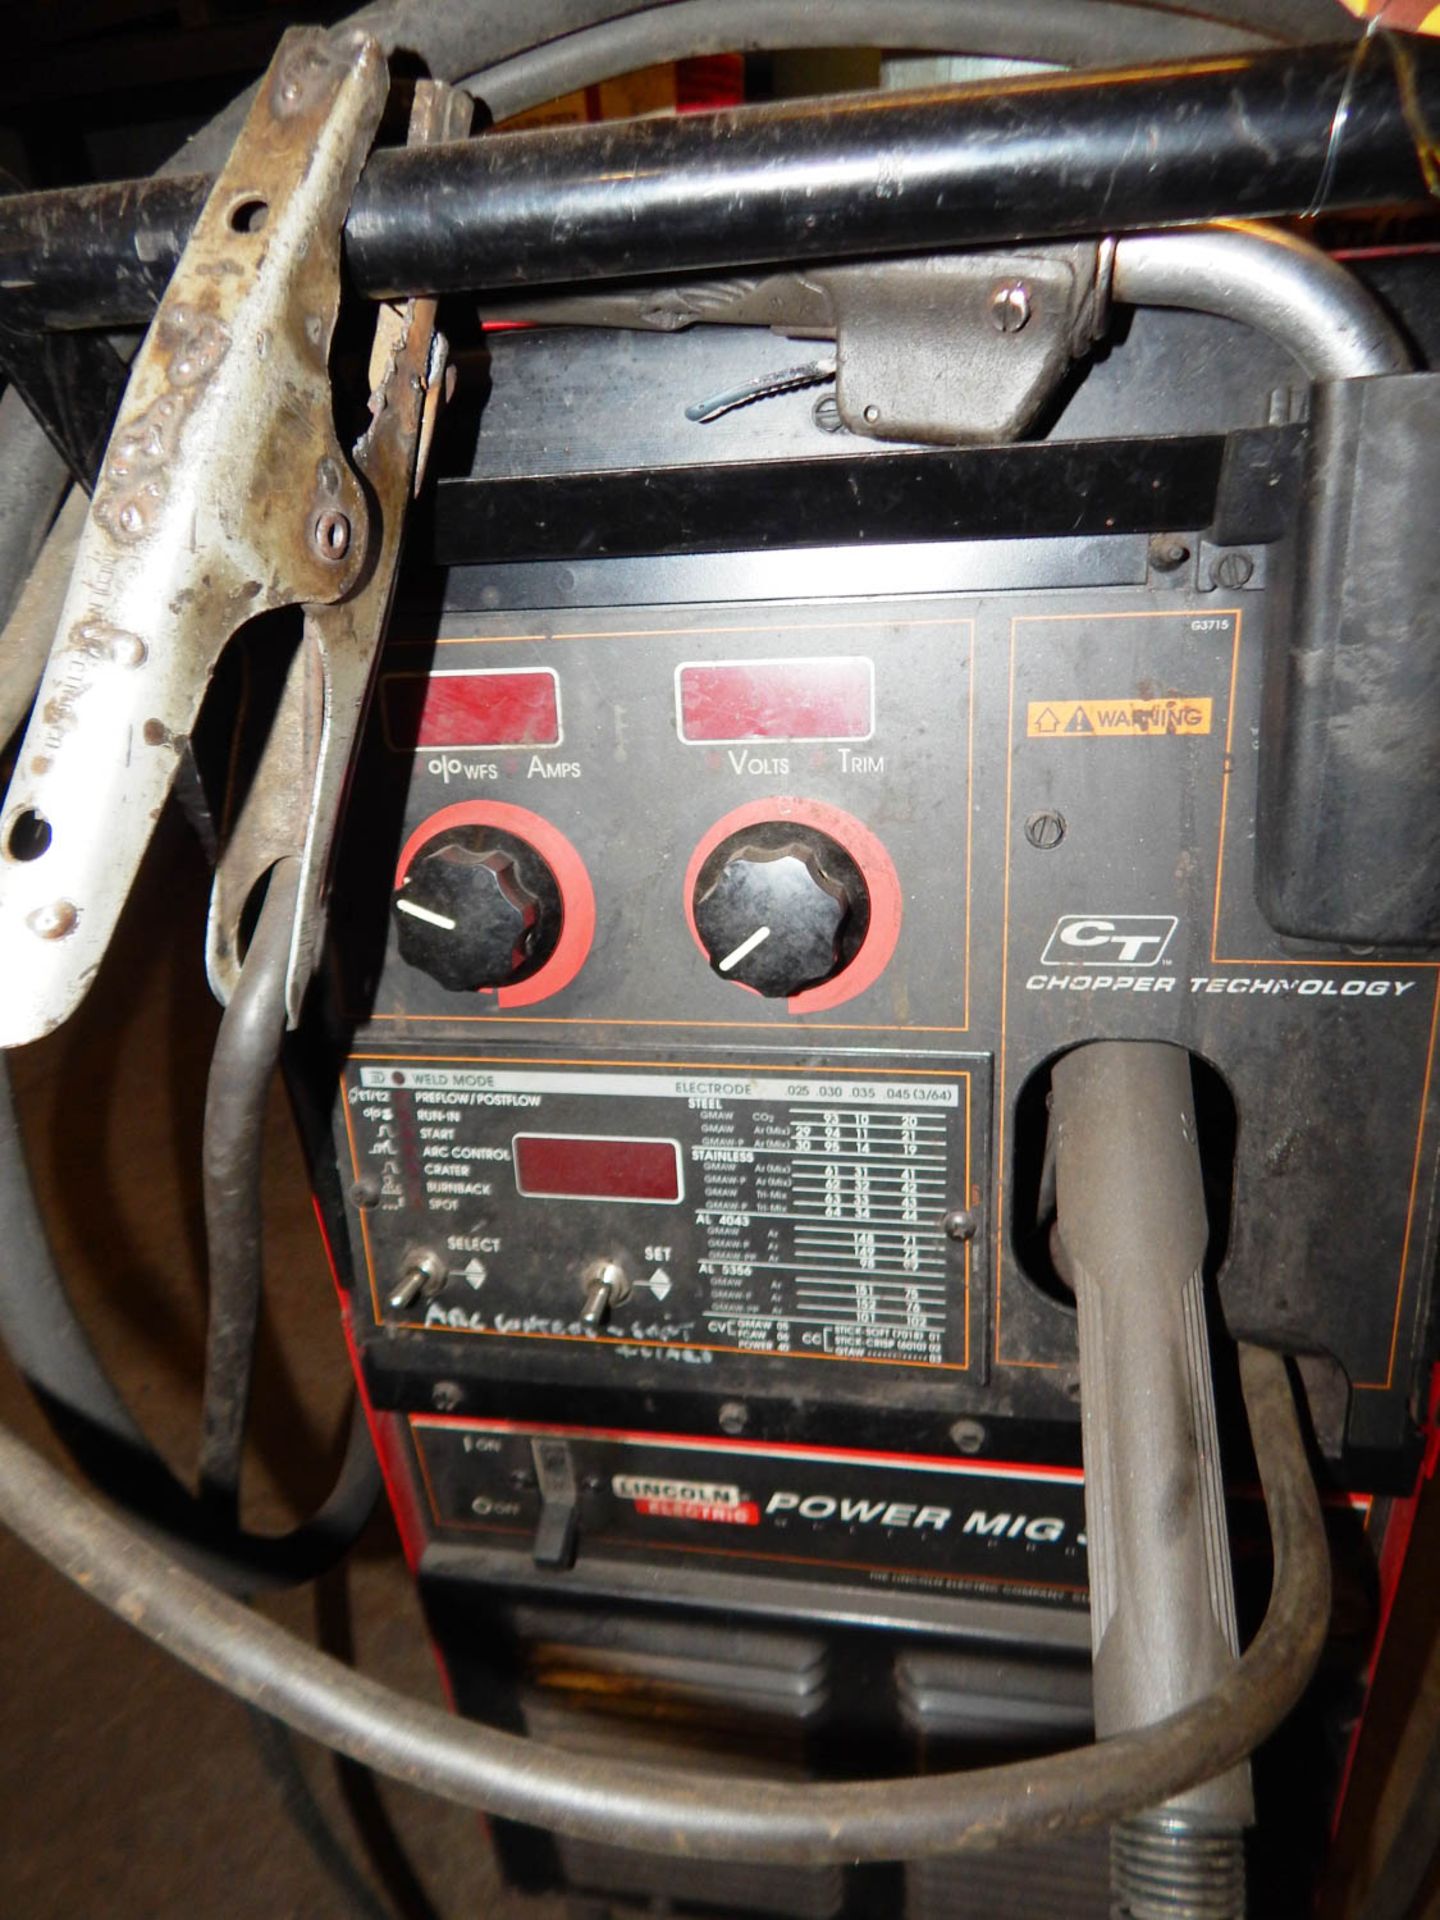 LINCOLN ELECTRIC POWER MIG 350 MULTI PROCESS MIG WELDER S/N: K2403-11147 (NO TANK) - Image 2 of 2